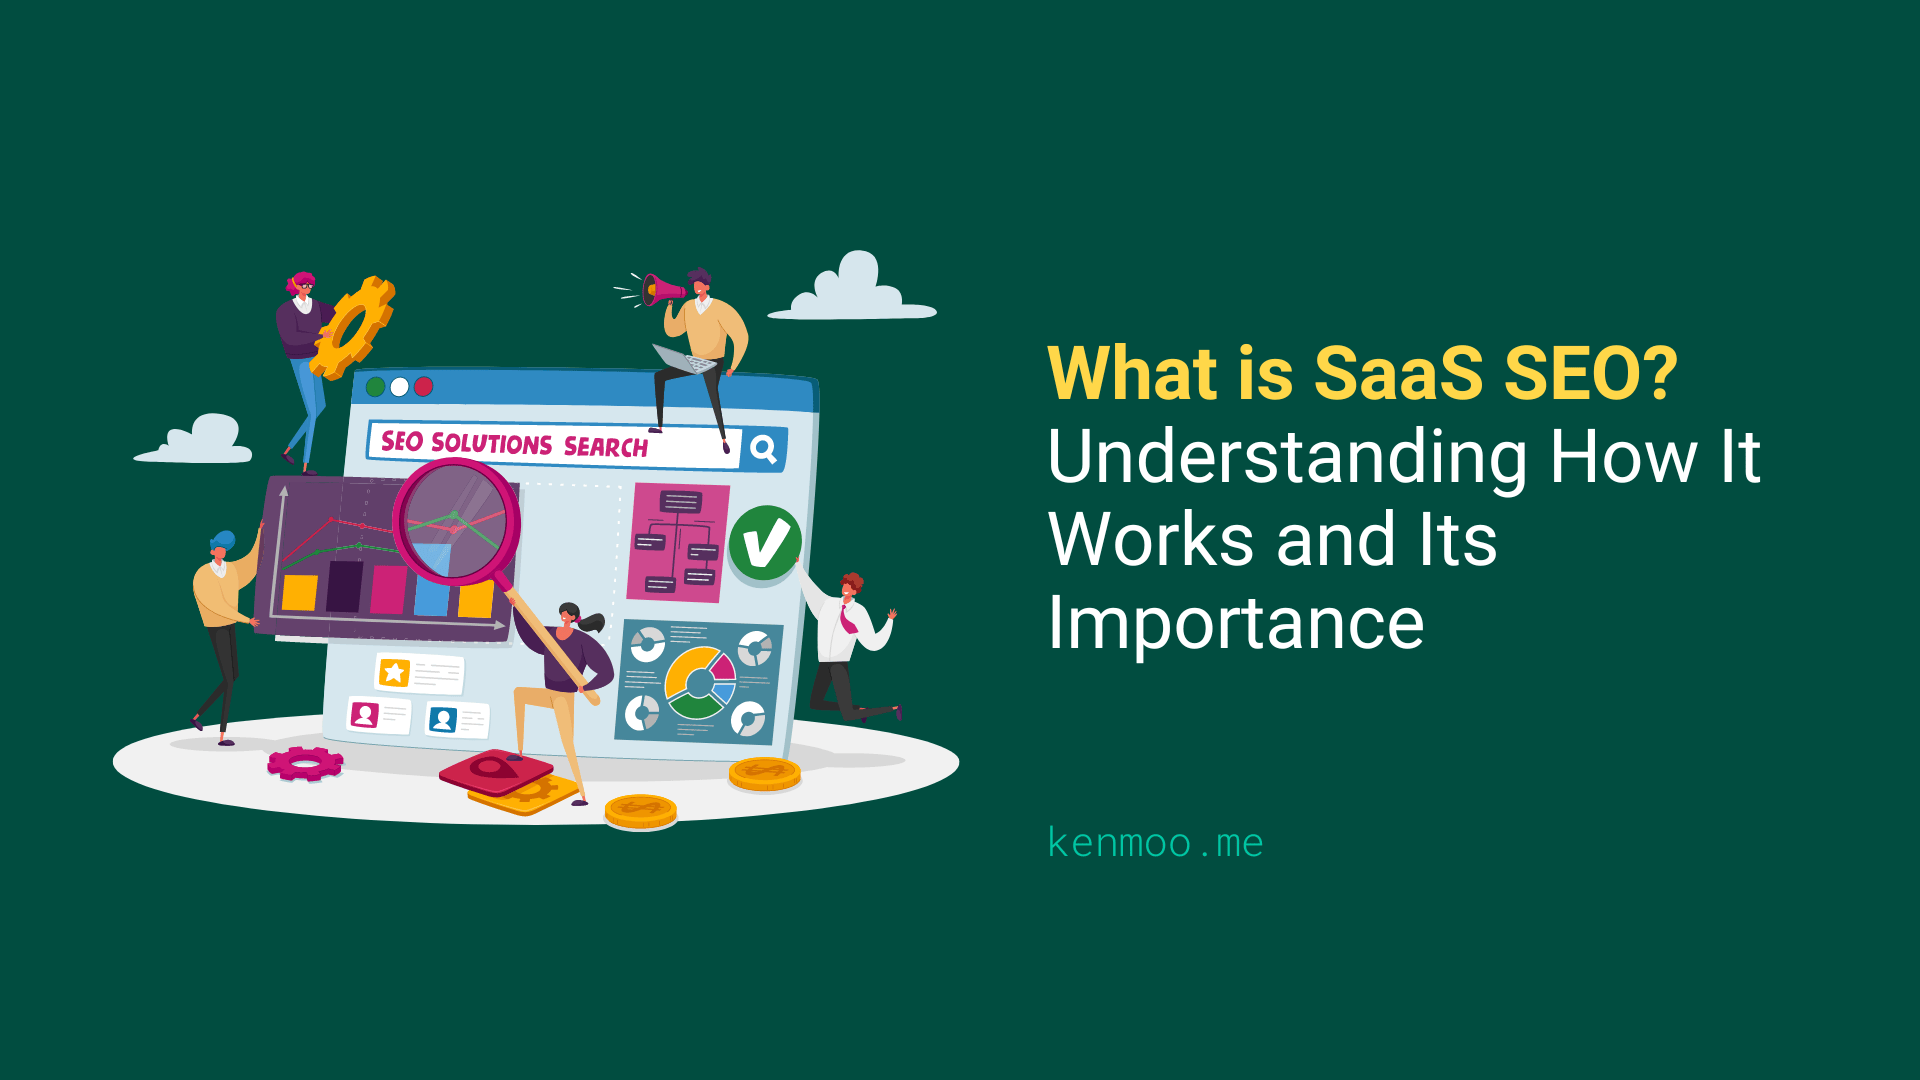 What is SaaS SEO? Understanding How It Works and Its Importance